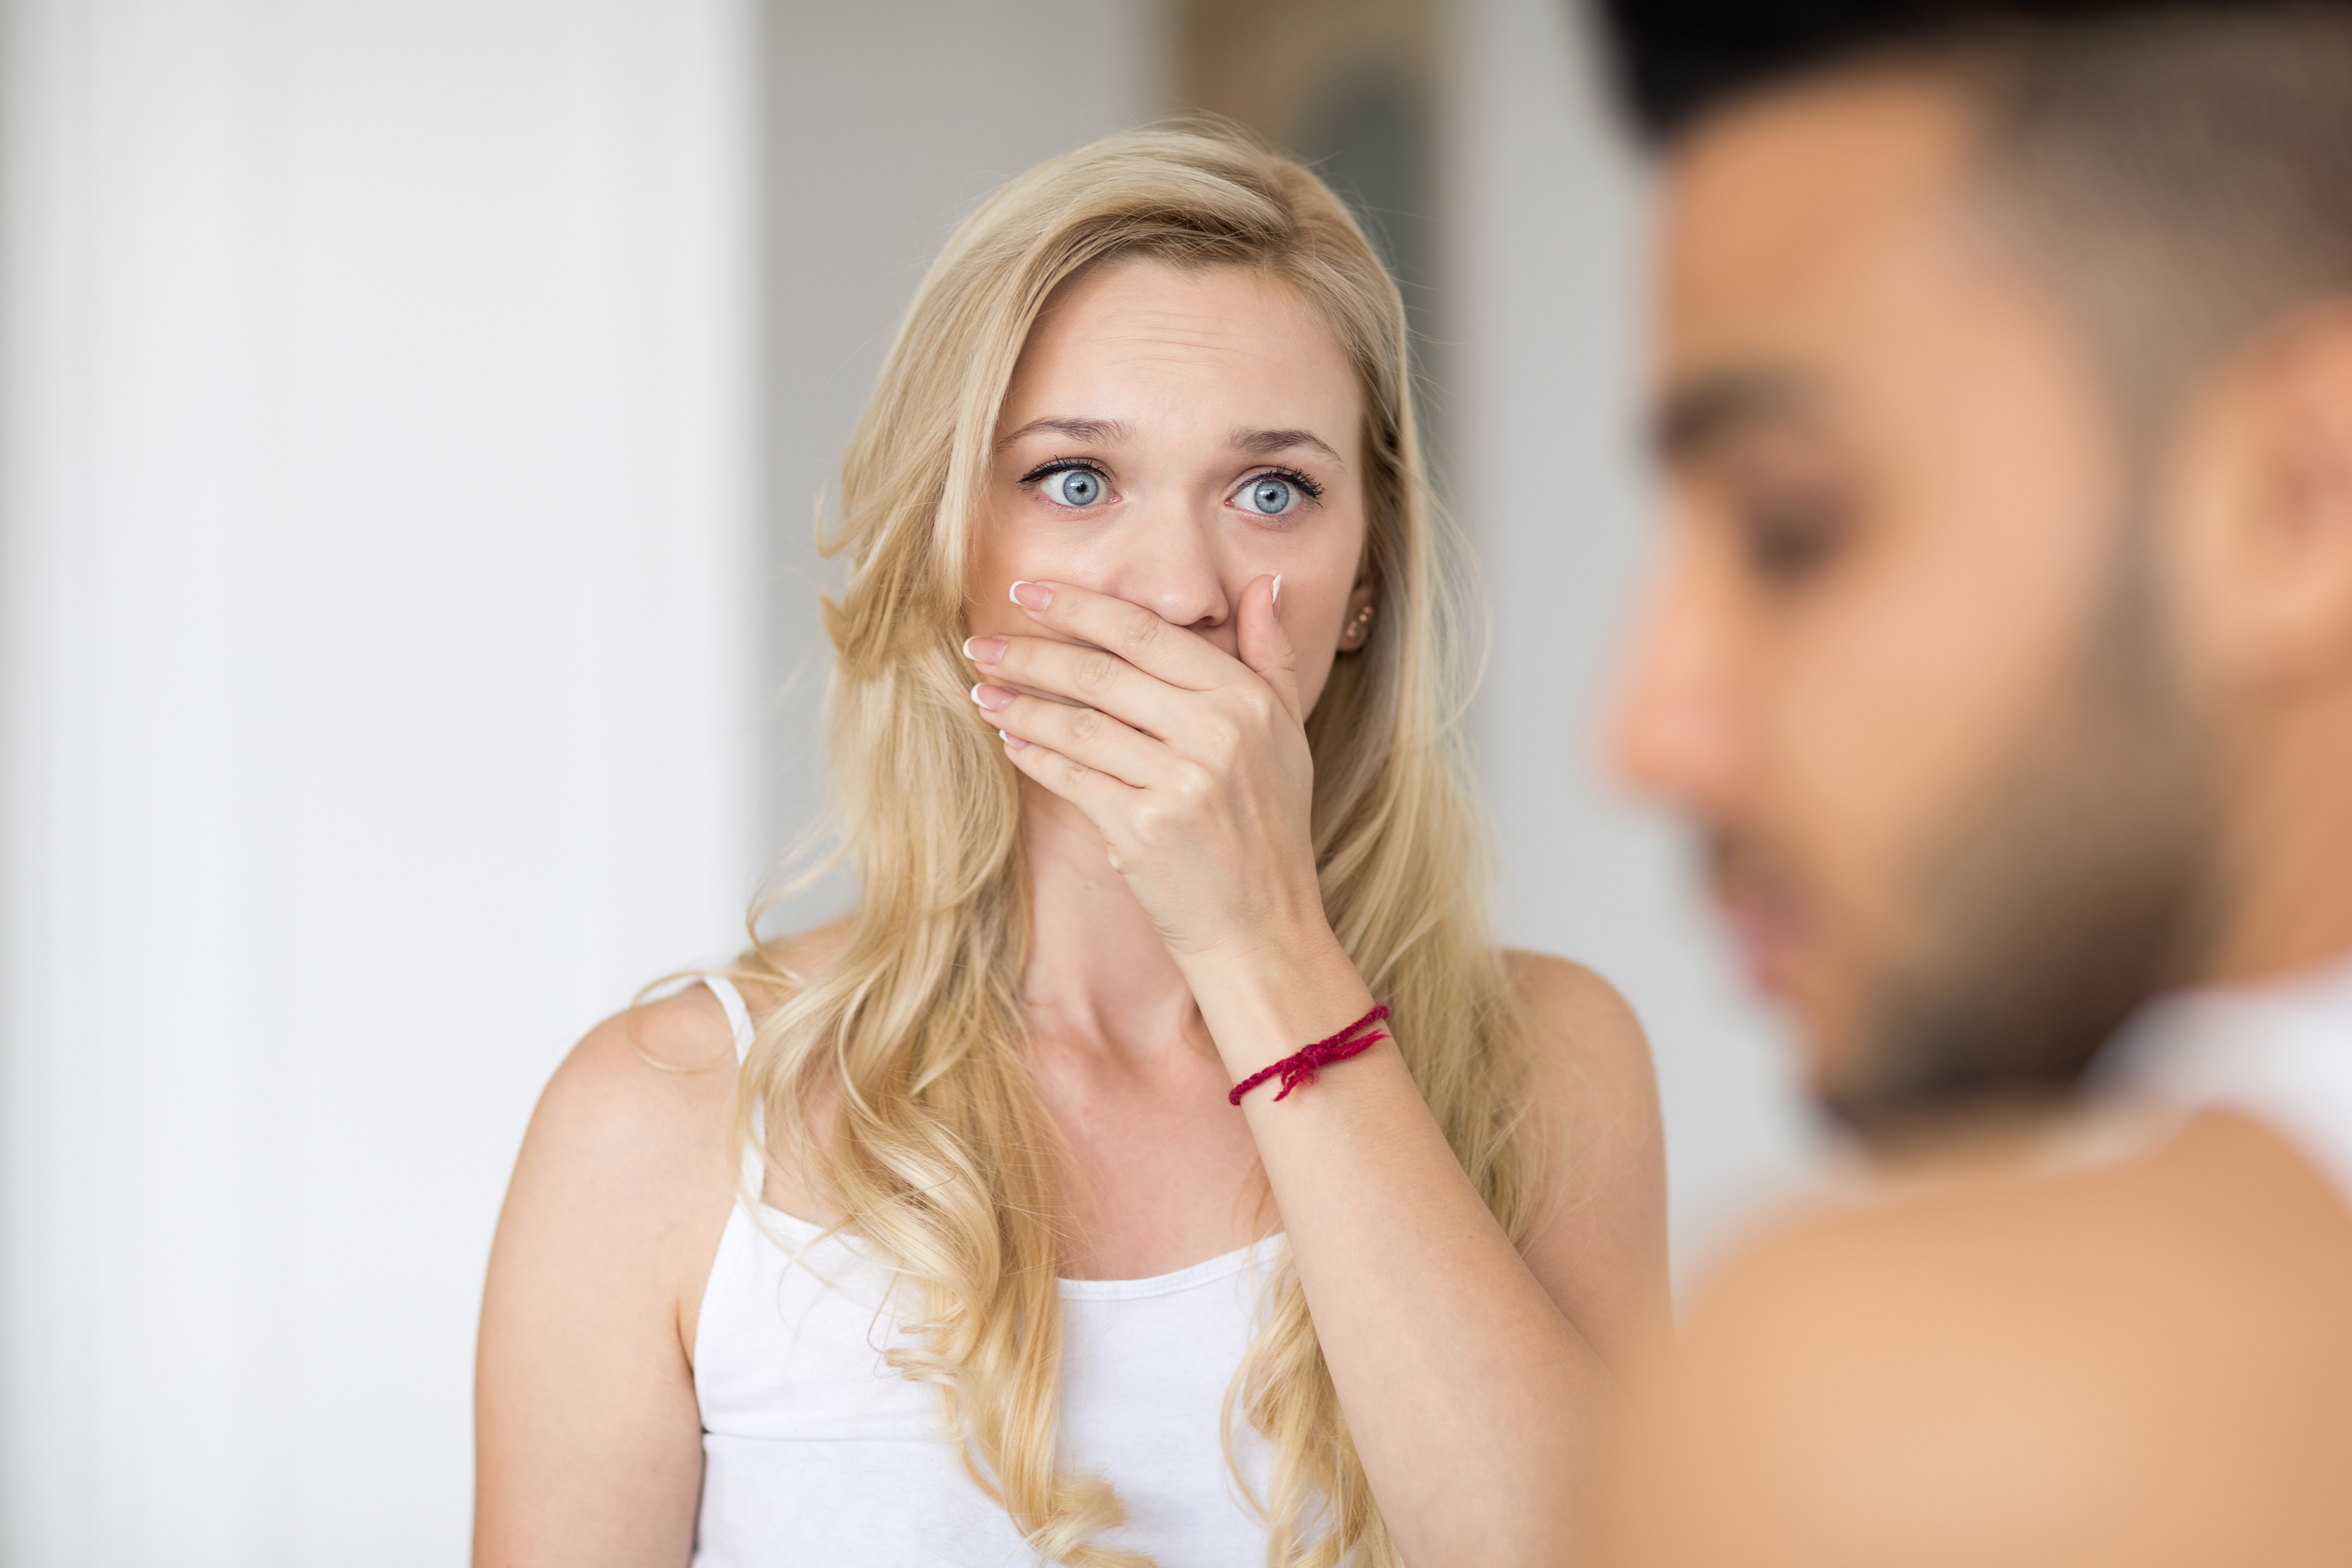 A shocked woman looking at a guilty-looking man | Source: Shutterstock